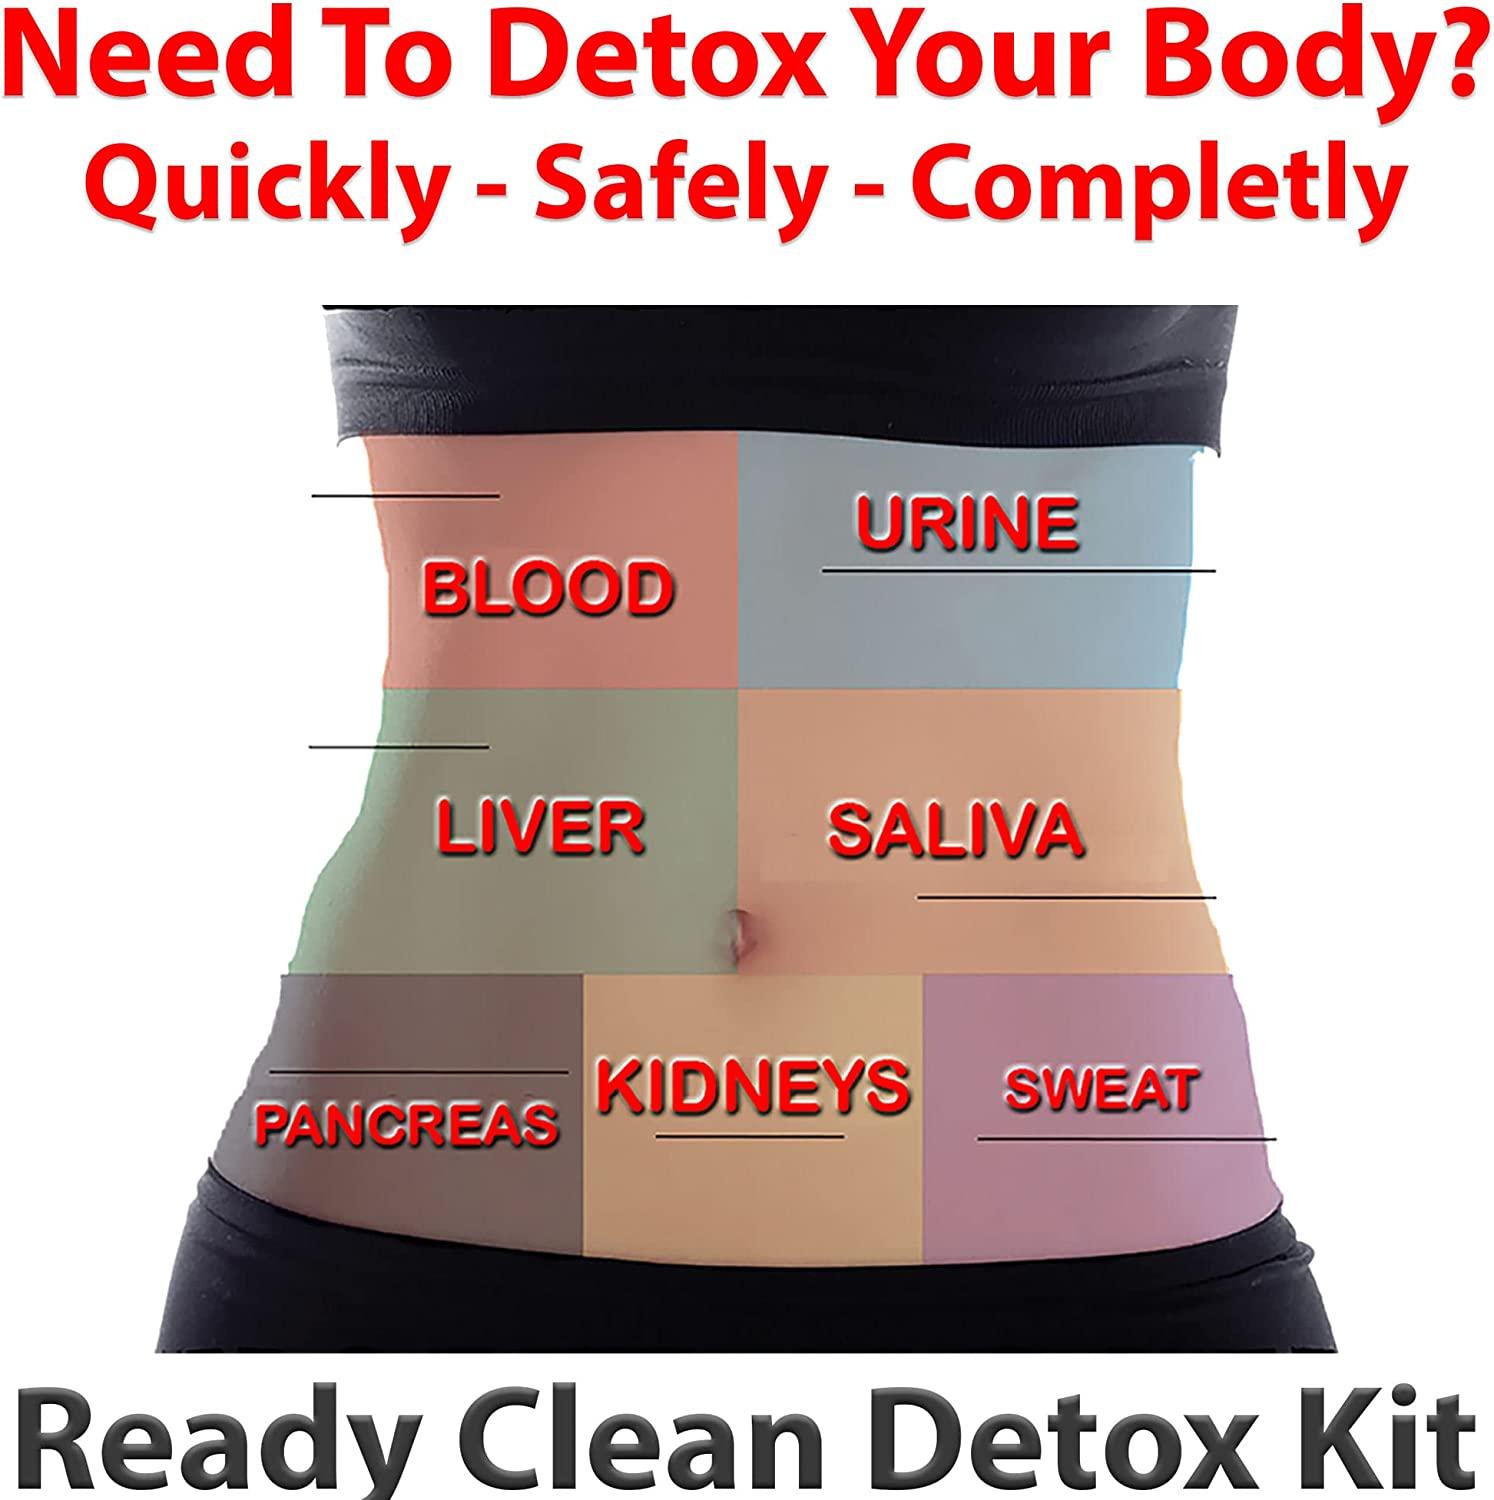 Ready Clean Detox Drink 16 oz. - Herbal Precleanse Capsules - RU Clean 6 -  Pre Cleanse, Detoxify and Quick Flush Your Body - Fast Professionally  Formulated 1 Hour RU Clean Detoxify Kit